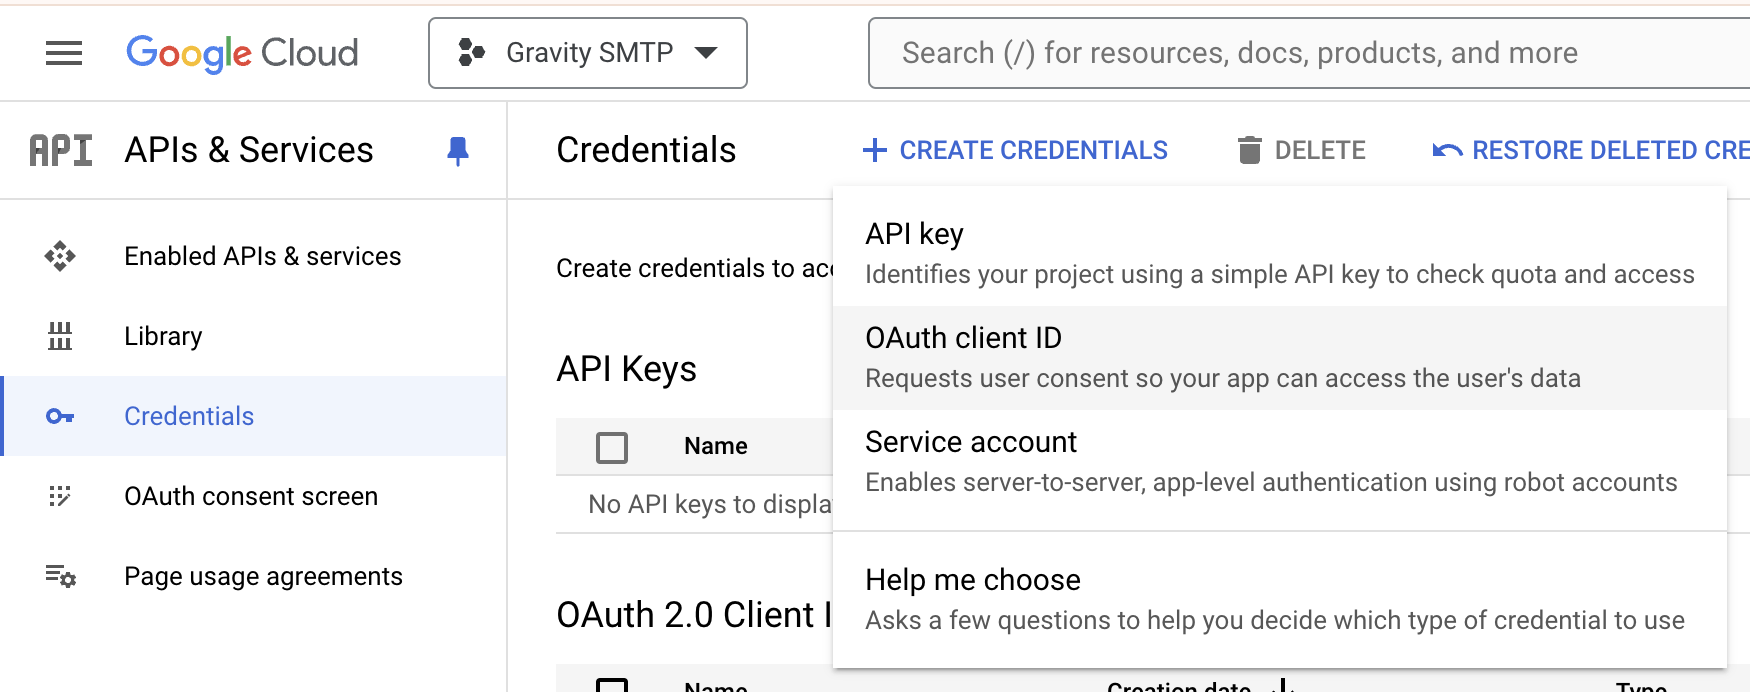 Image showing credentials screen in the Google Cloud Console.